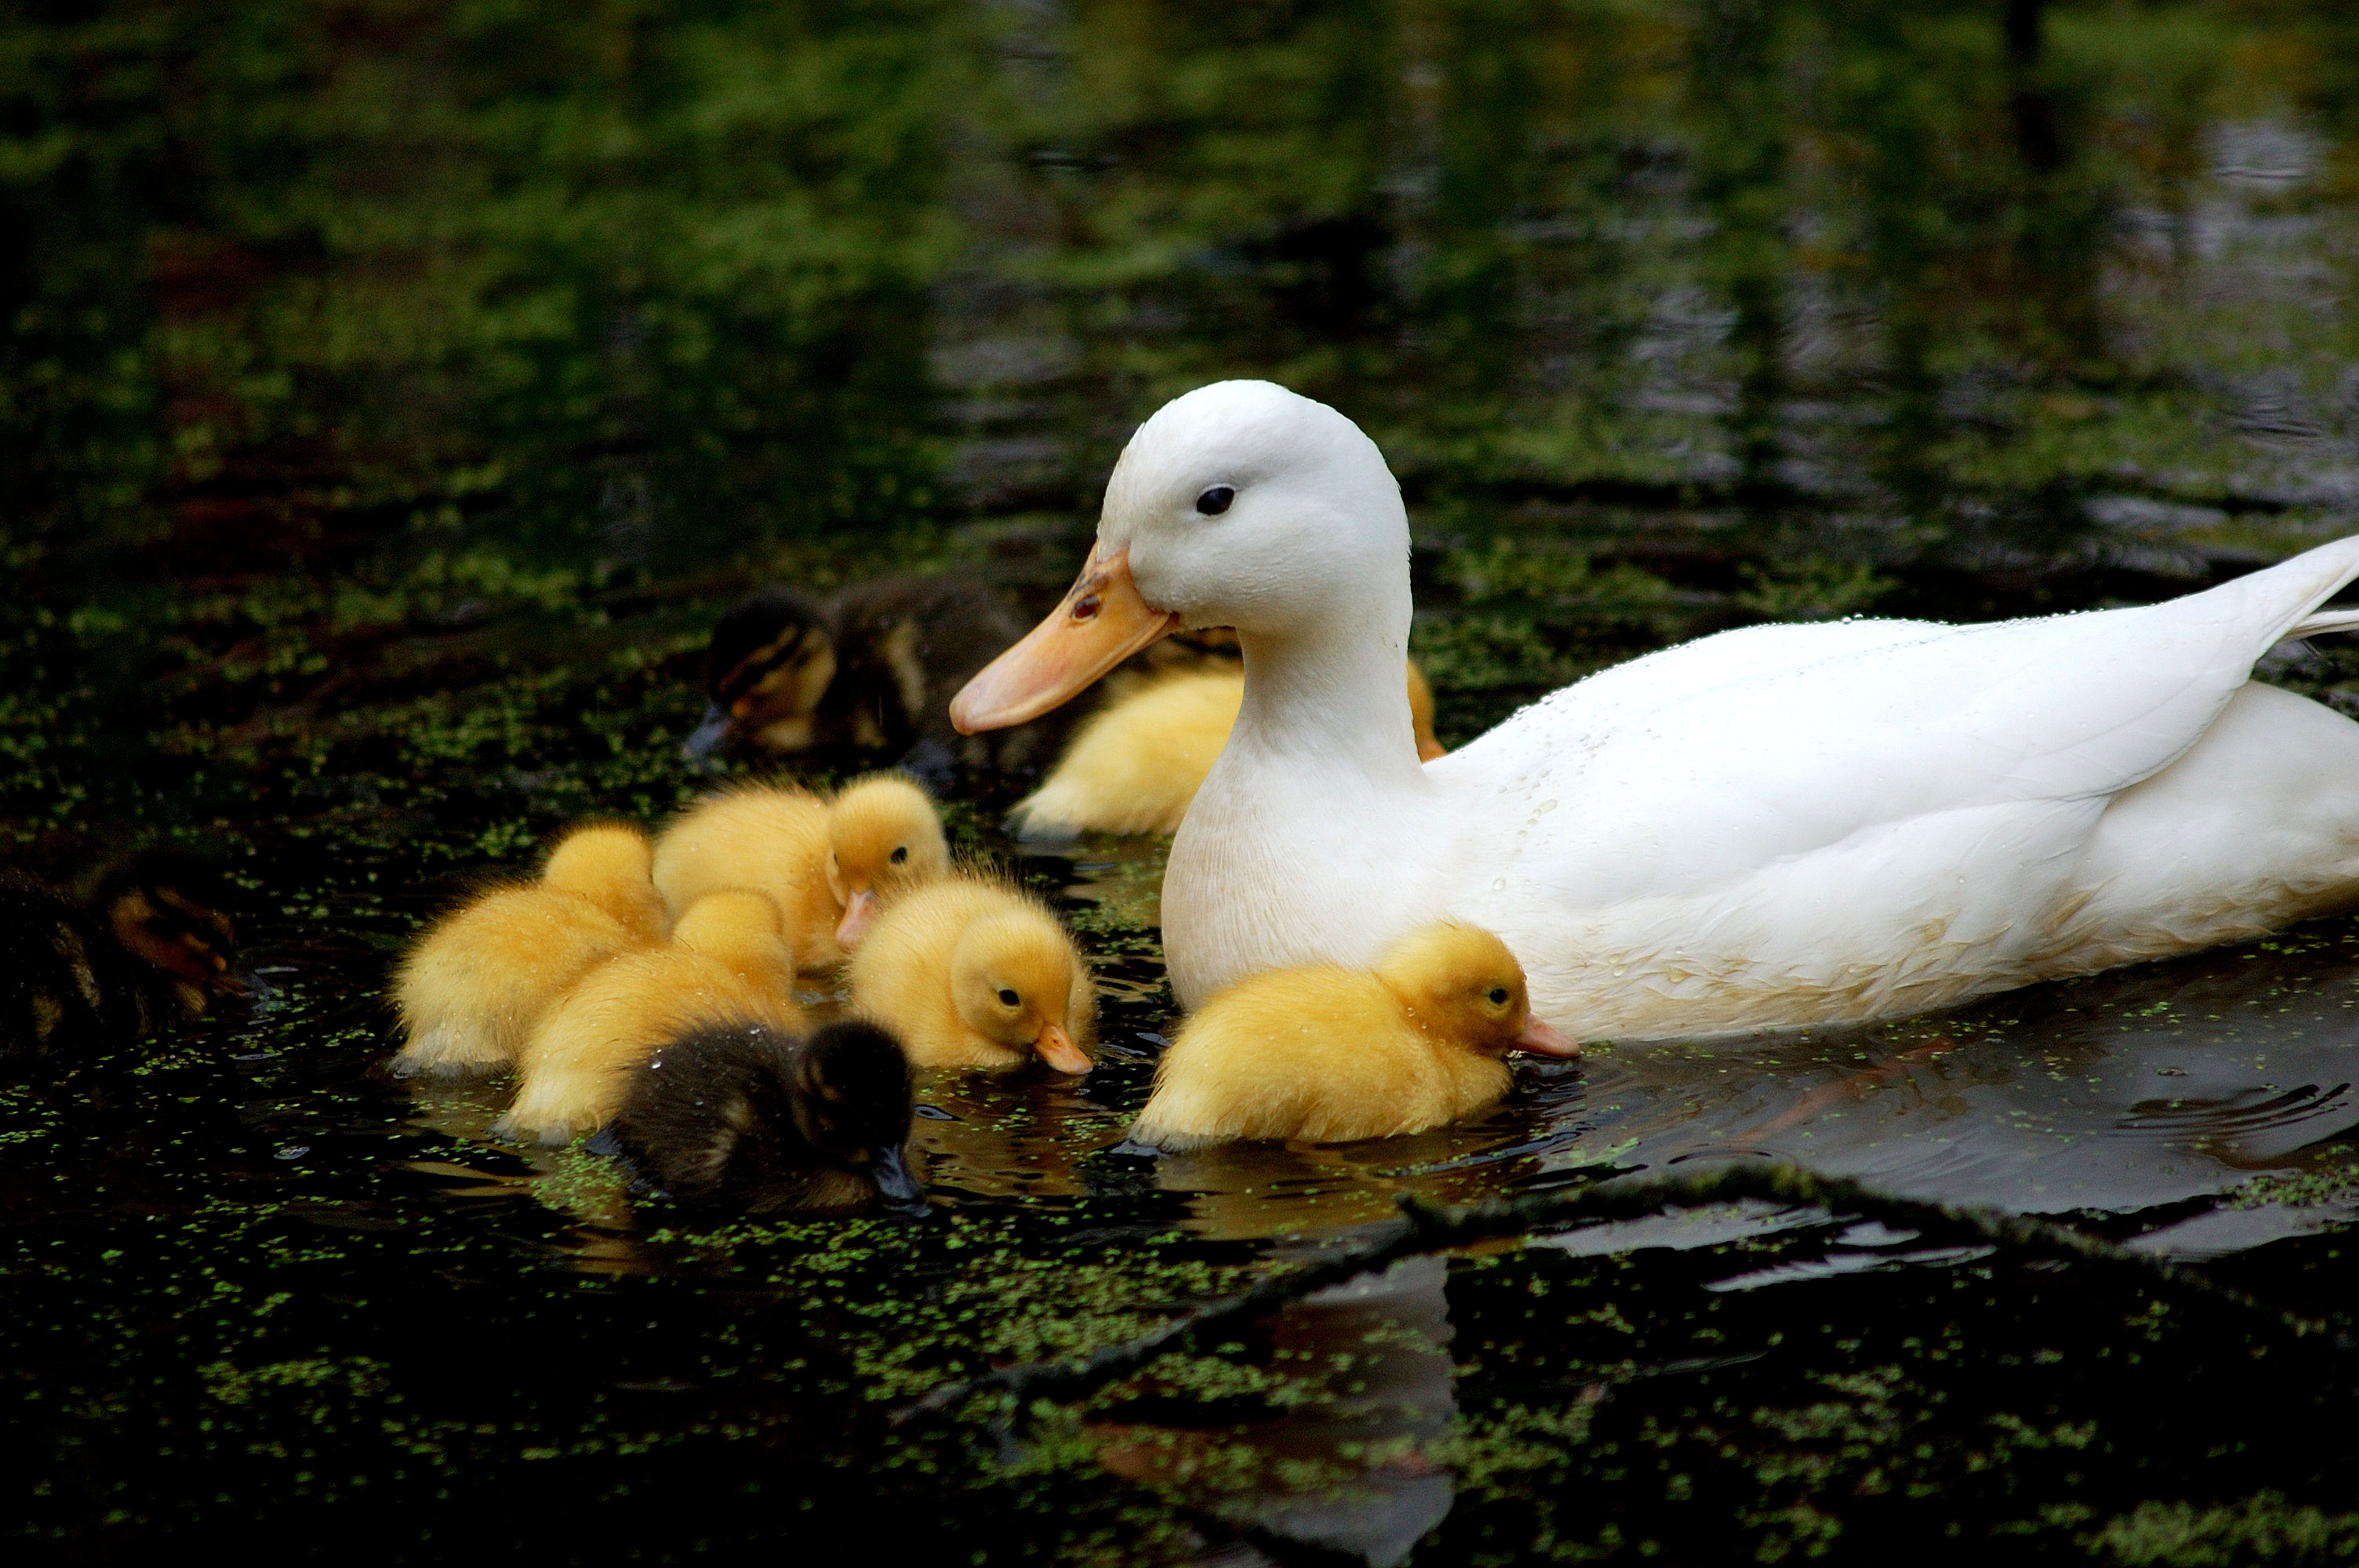 mom_with_baby_ducks_by_thea90.jpeg